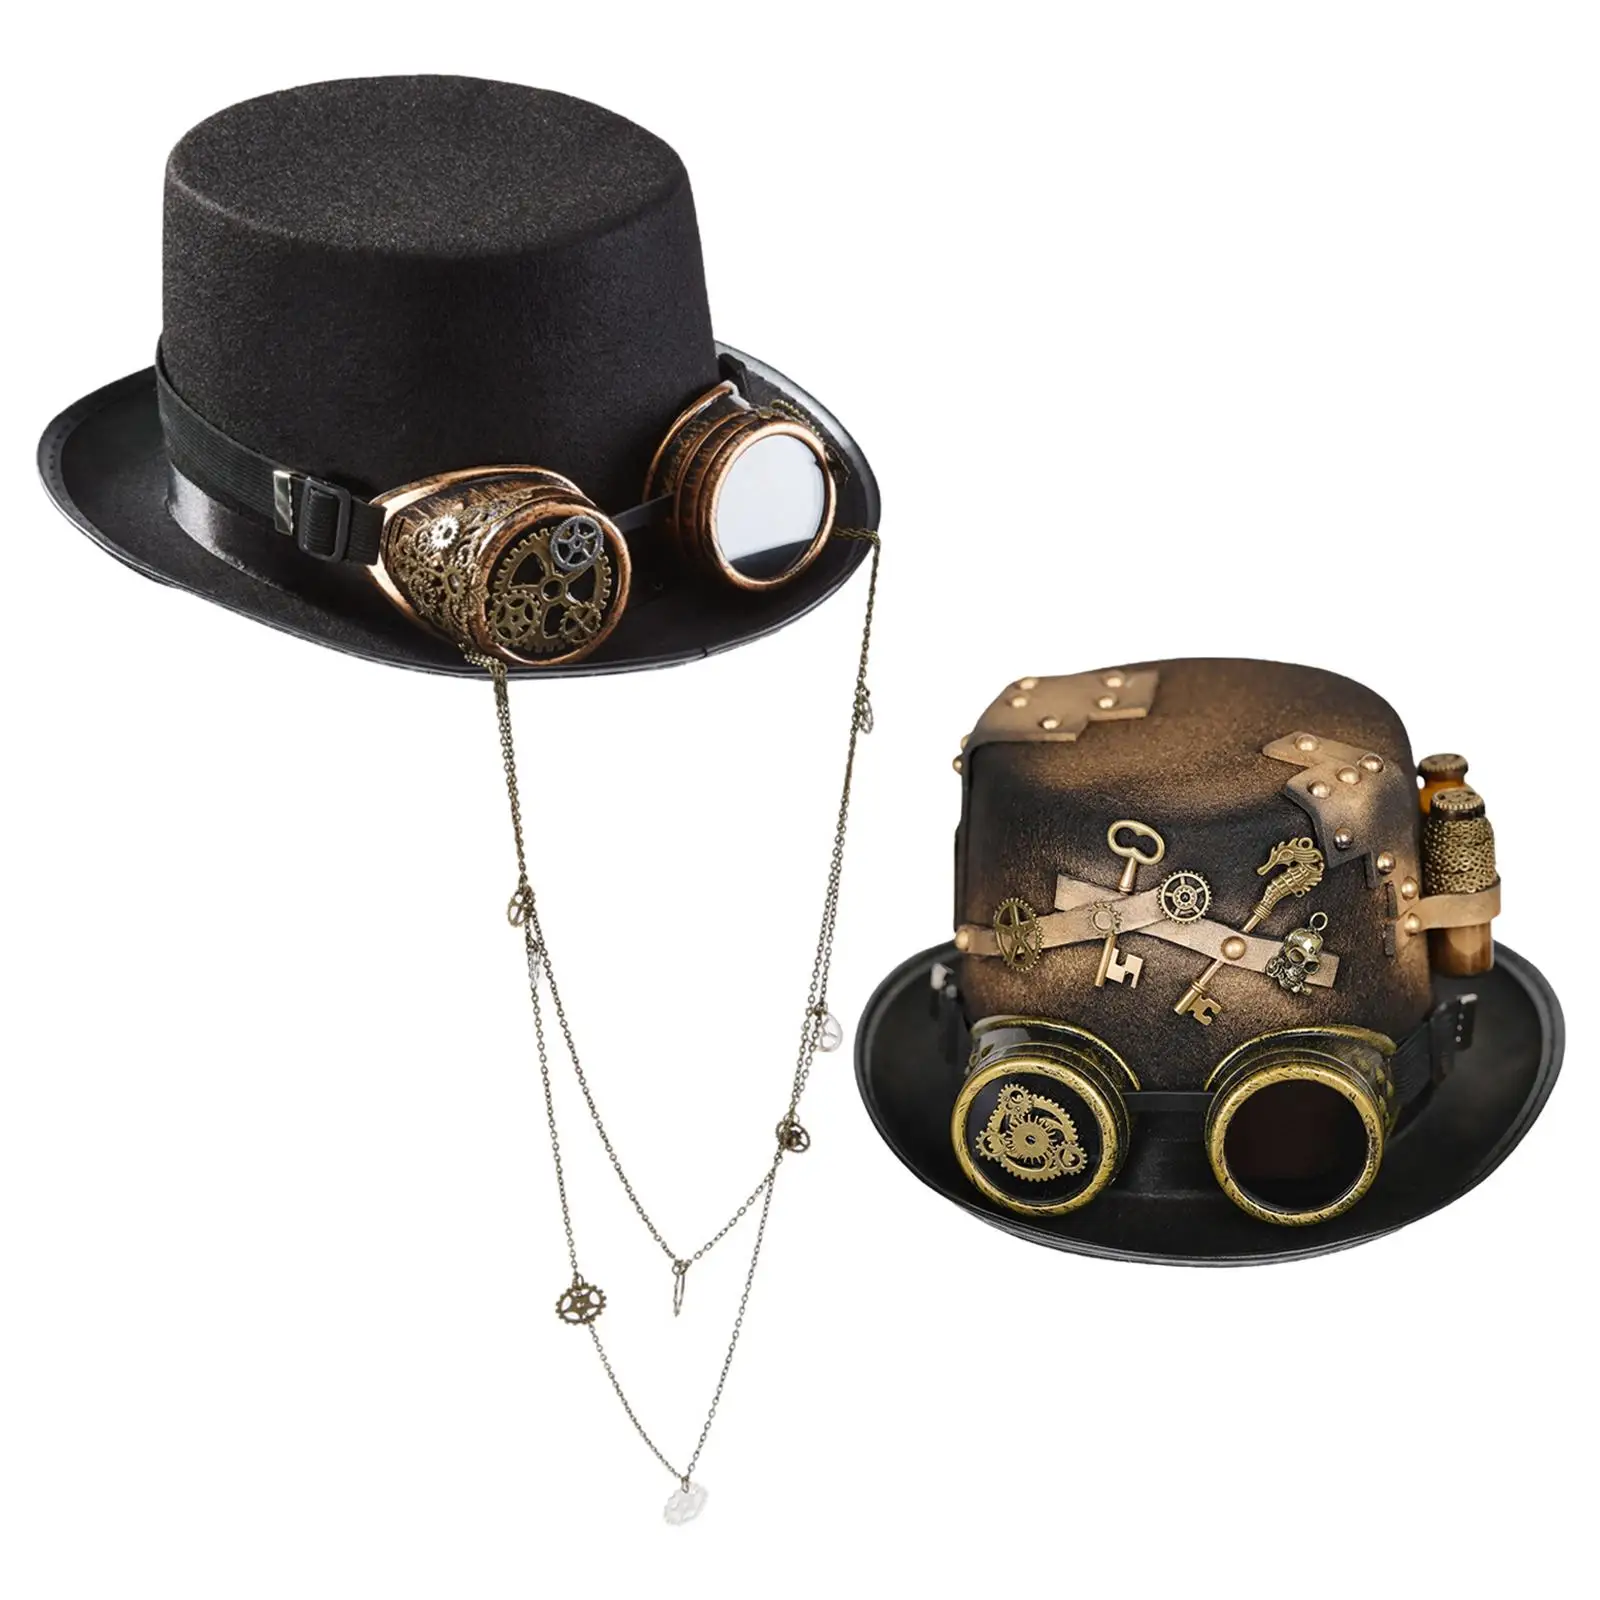 Retro 2 Pieces Gothic Steampunk Top Hat with Goggles, Unisex Industrial Age Head Circumference 56-60cm Gift Renaissance Costume